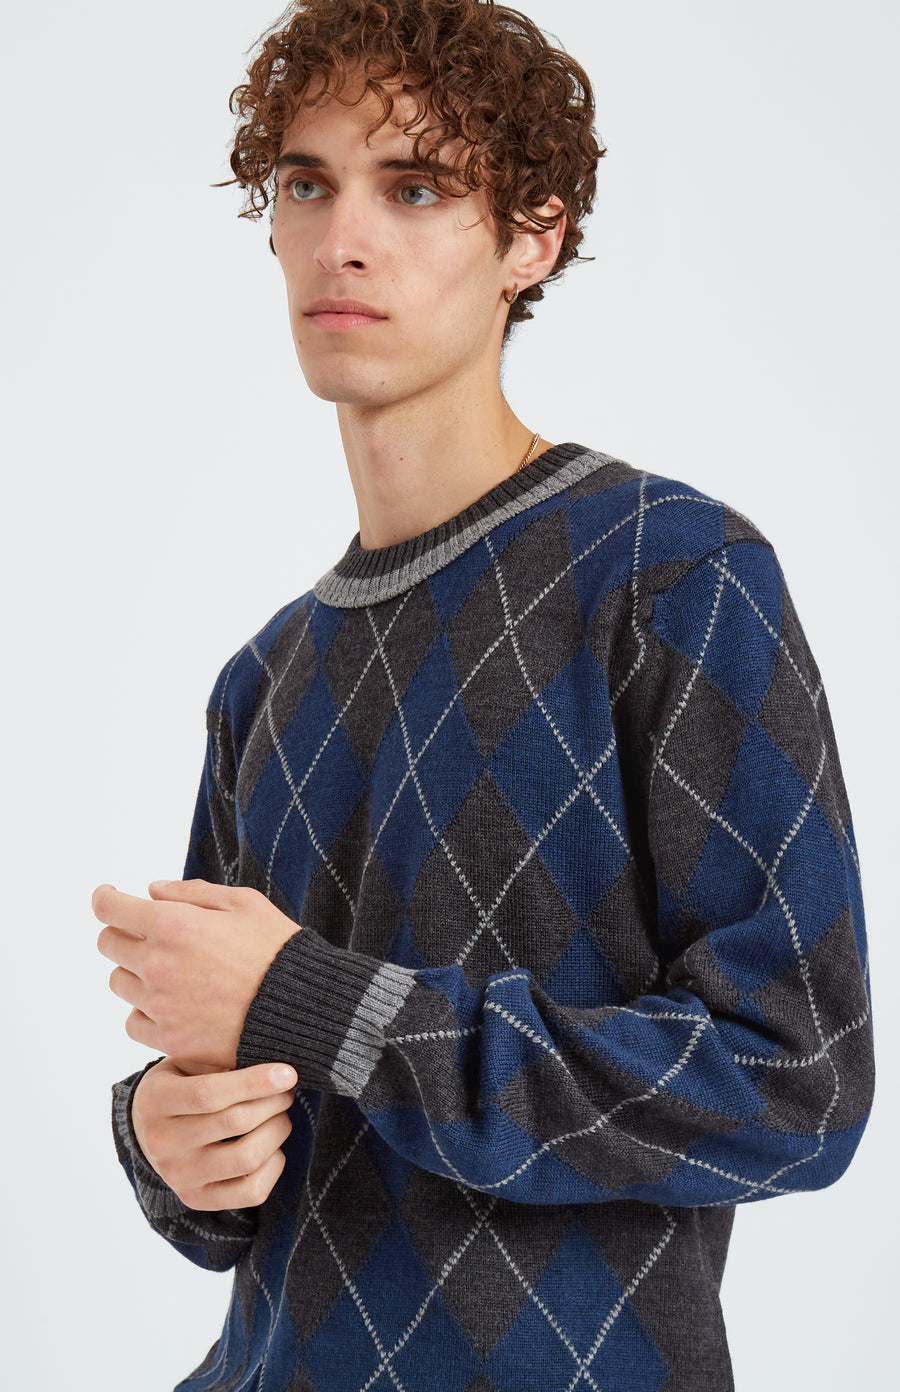 Pringle of Scotland Men's Argyle Merino Jumper In Charcoal And Flannel on model